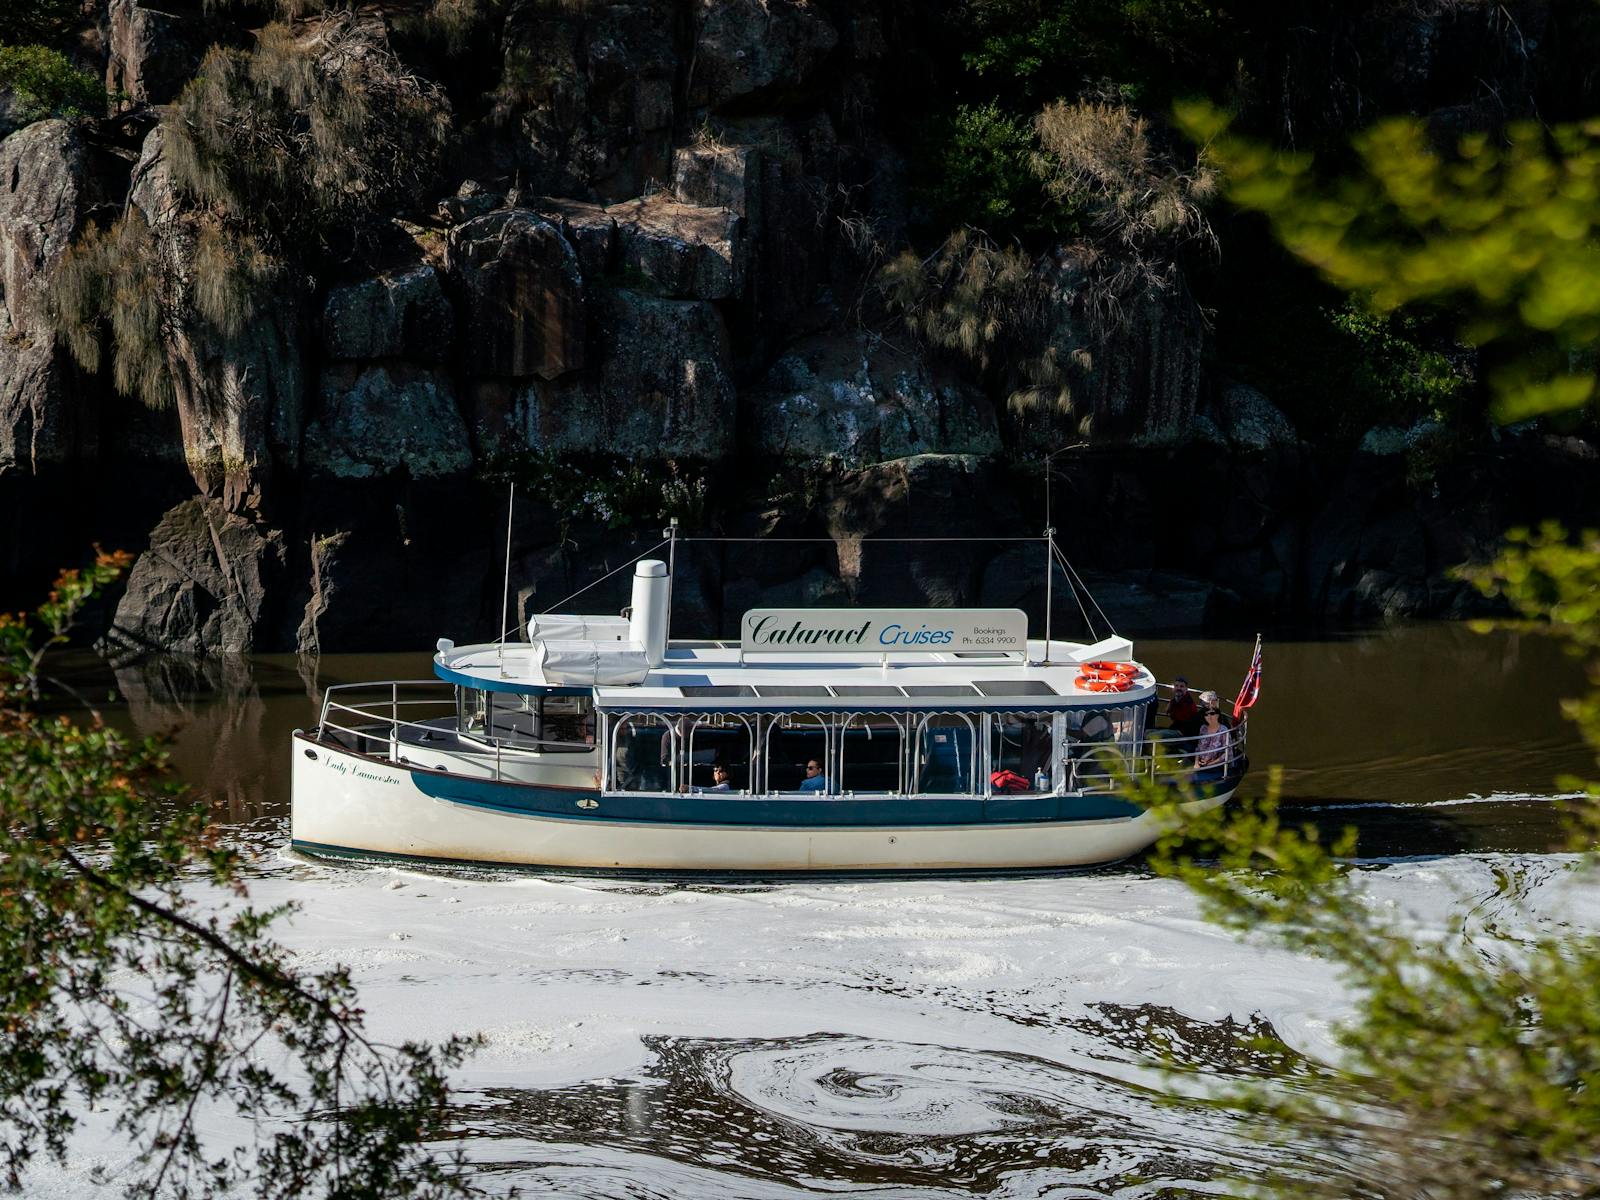 Lady Launceston amongst cliff faces of the Cataract Gorge